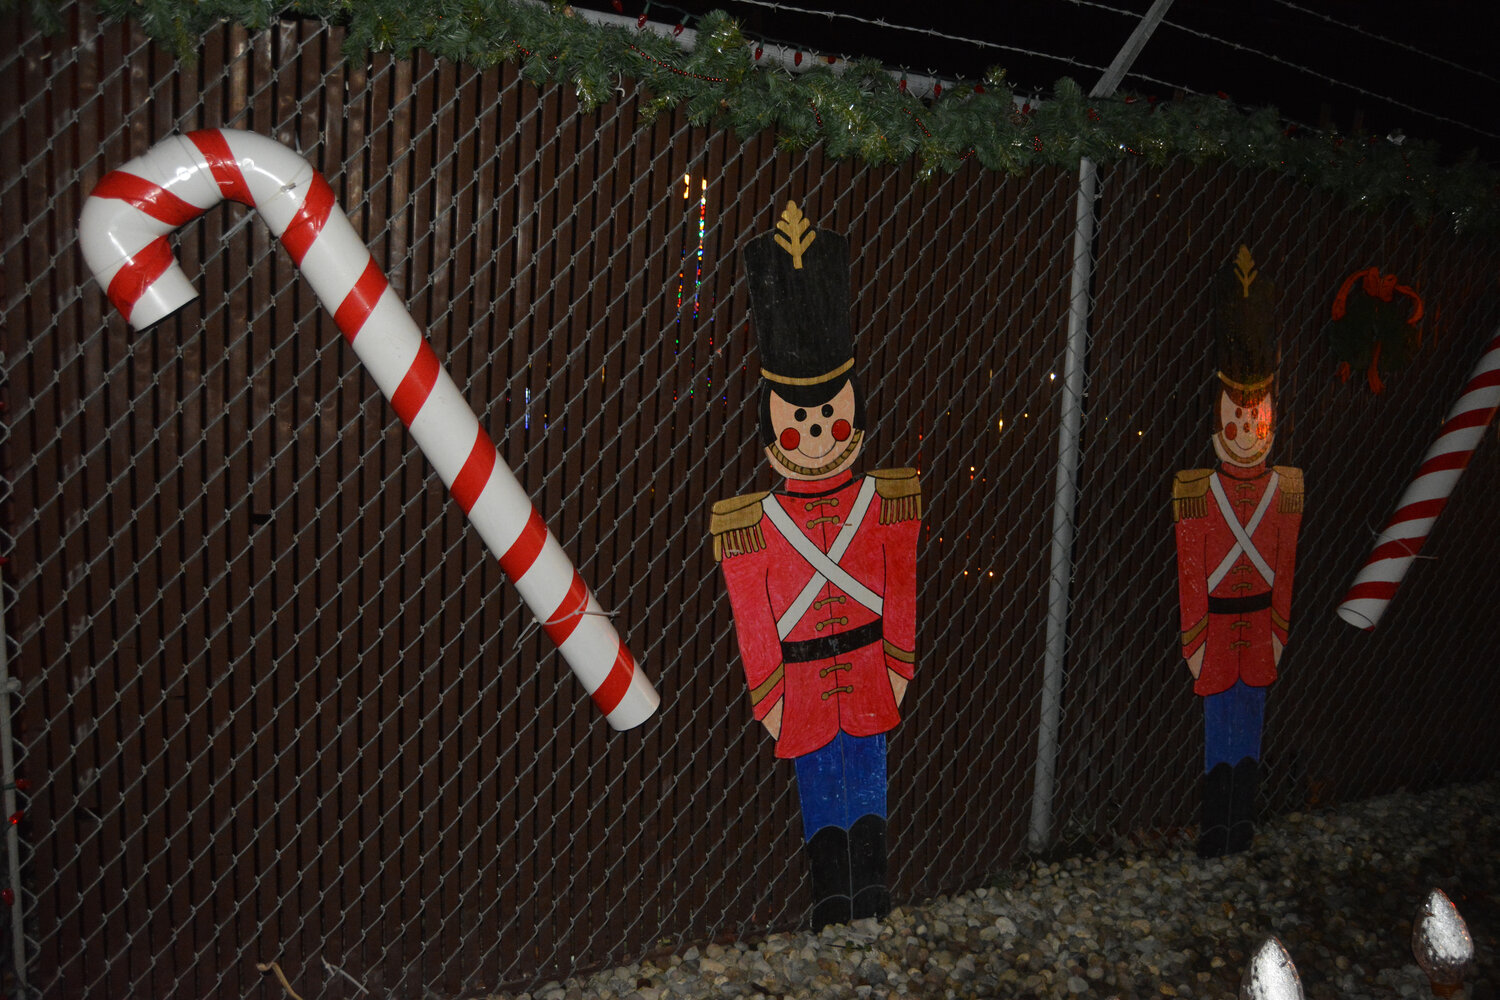 Candy canes and nutcrackers decorate a fence in Rainier's Holiday Park on Dec. 2.